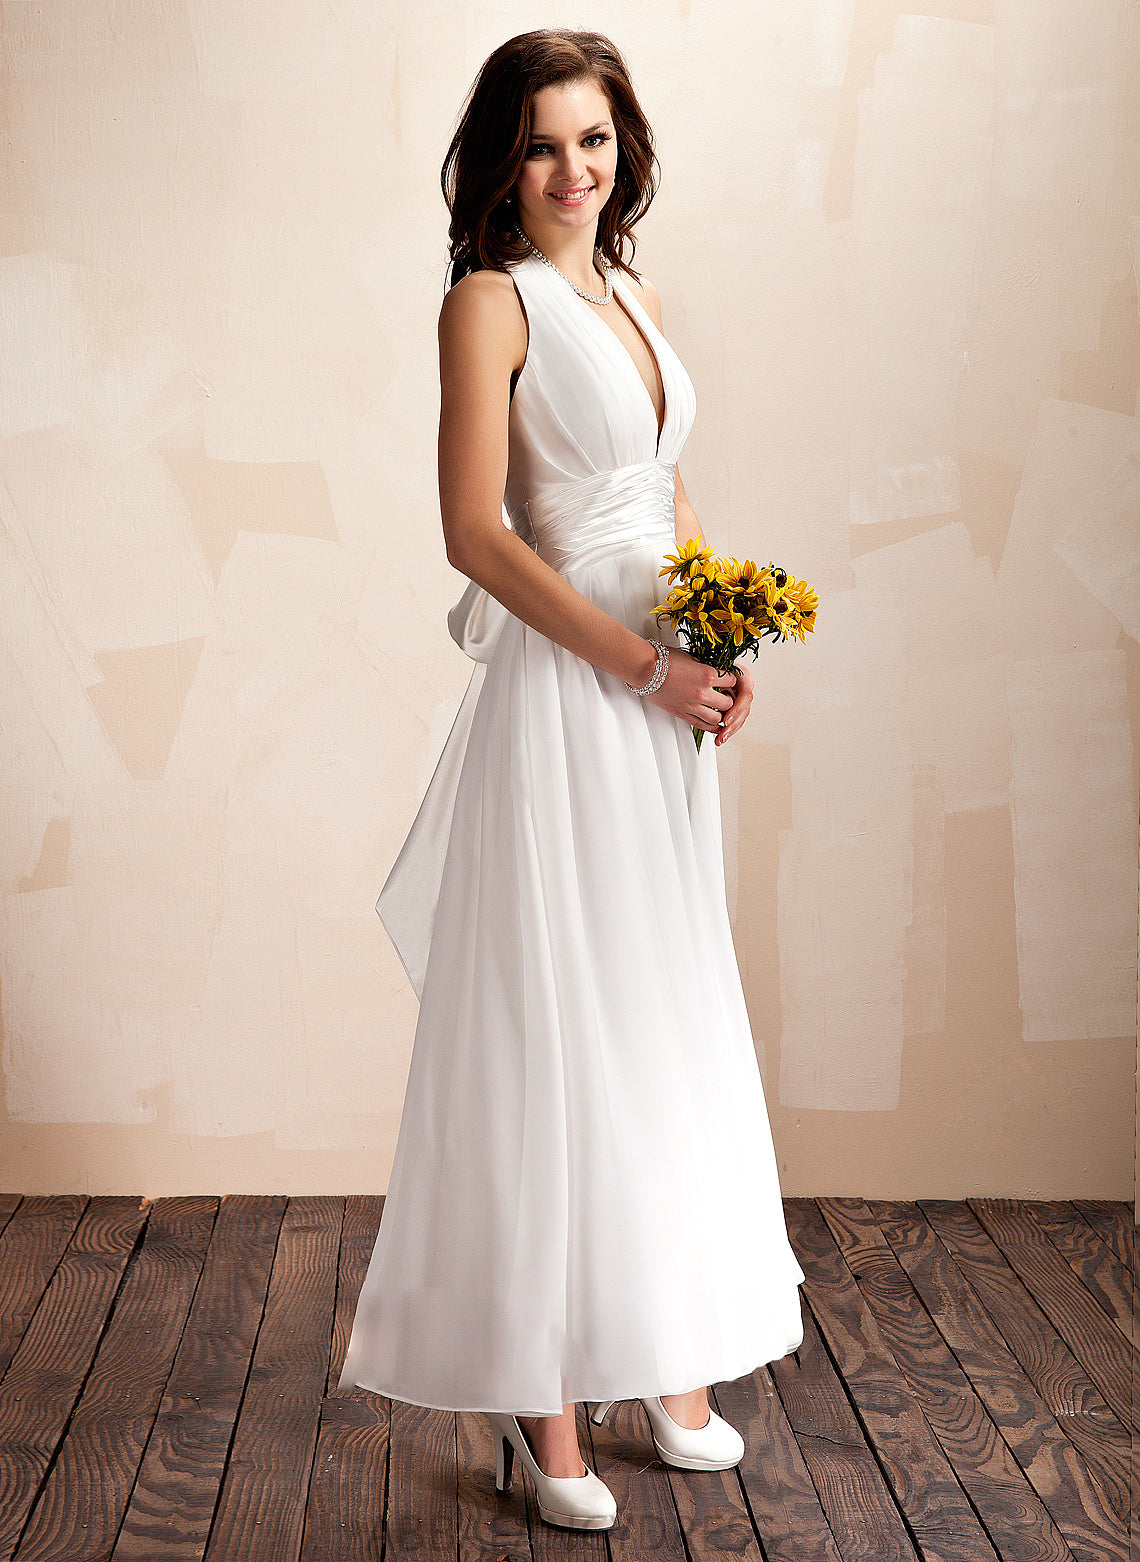 Chiffon A-Line Halter Wedding Dresses Wedding Dress Ankle-Length Meredith Ruffle With Bow(s)